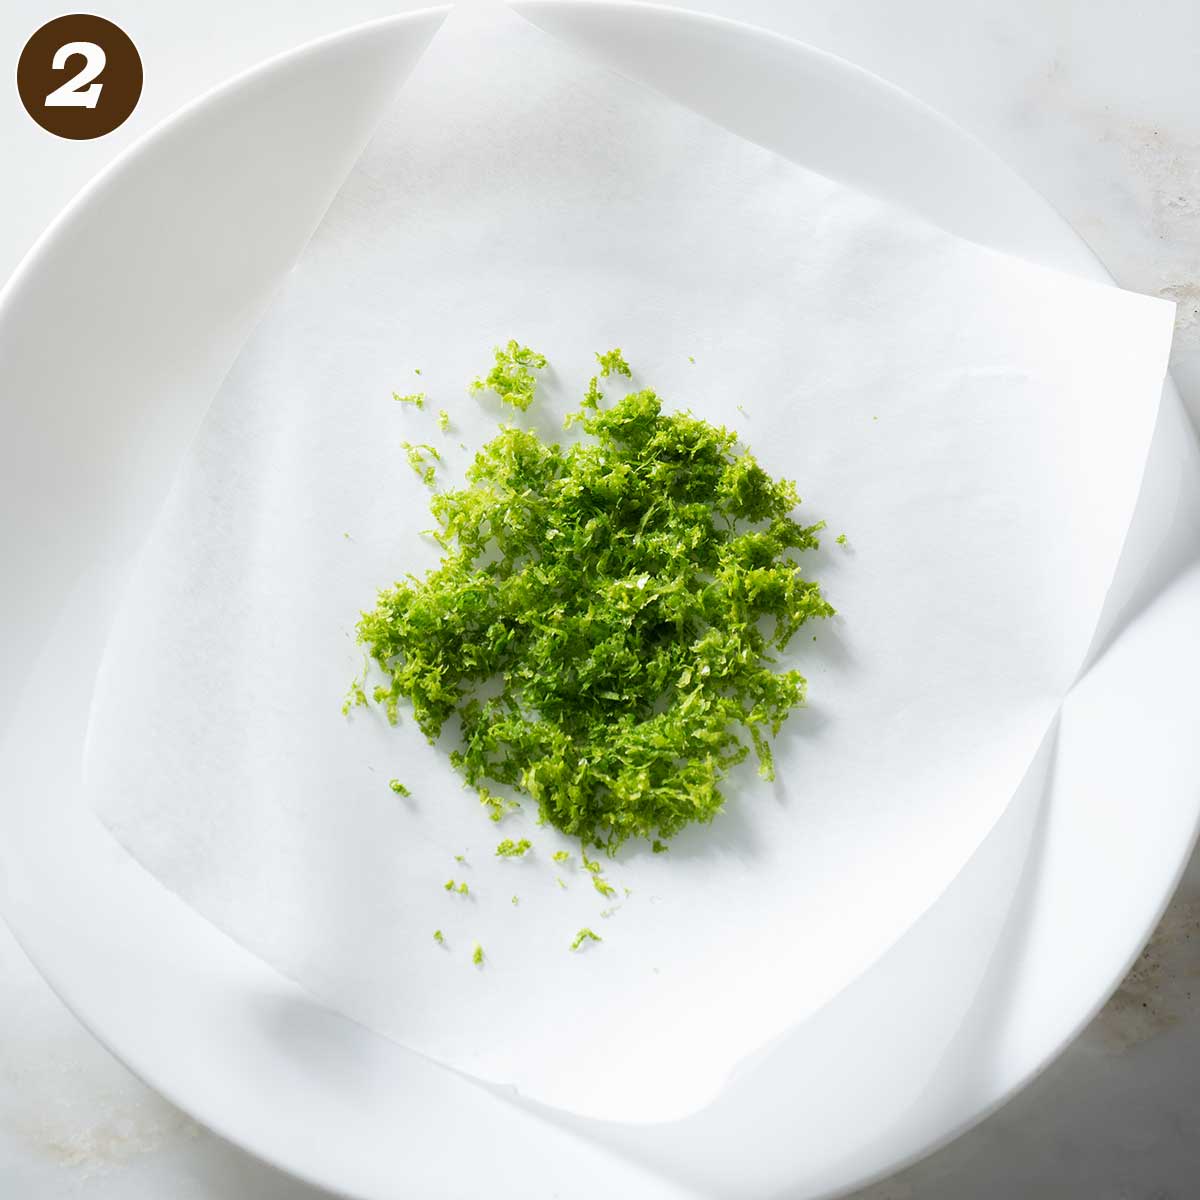 Lime zest on wax paper on a plate.